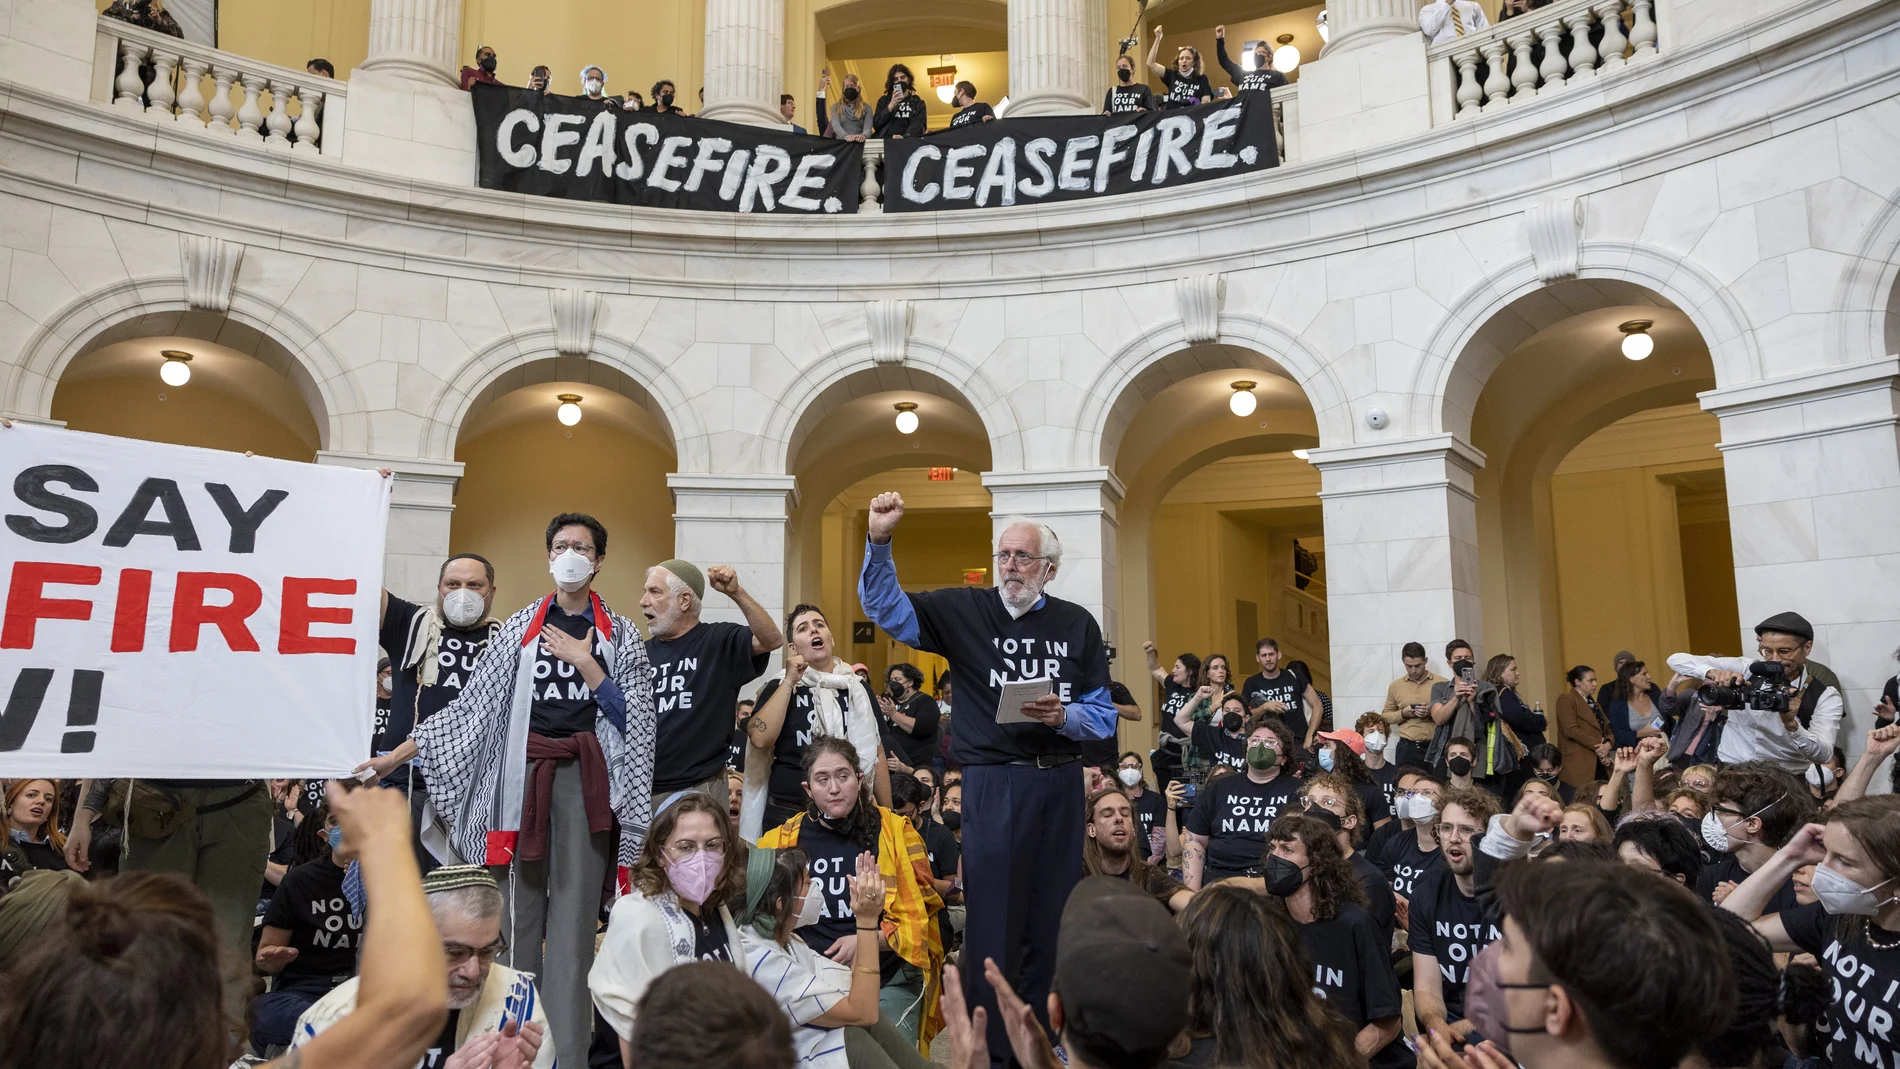 Demonstrators, calling for a ceasefire in the ongoing war between Israel and Hamas, protest inside the Cannon House Office Building at the Capitol in Washington.